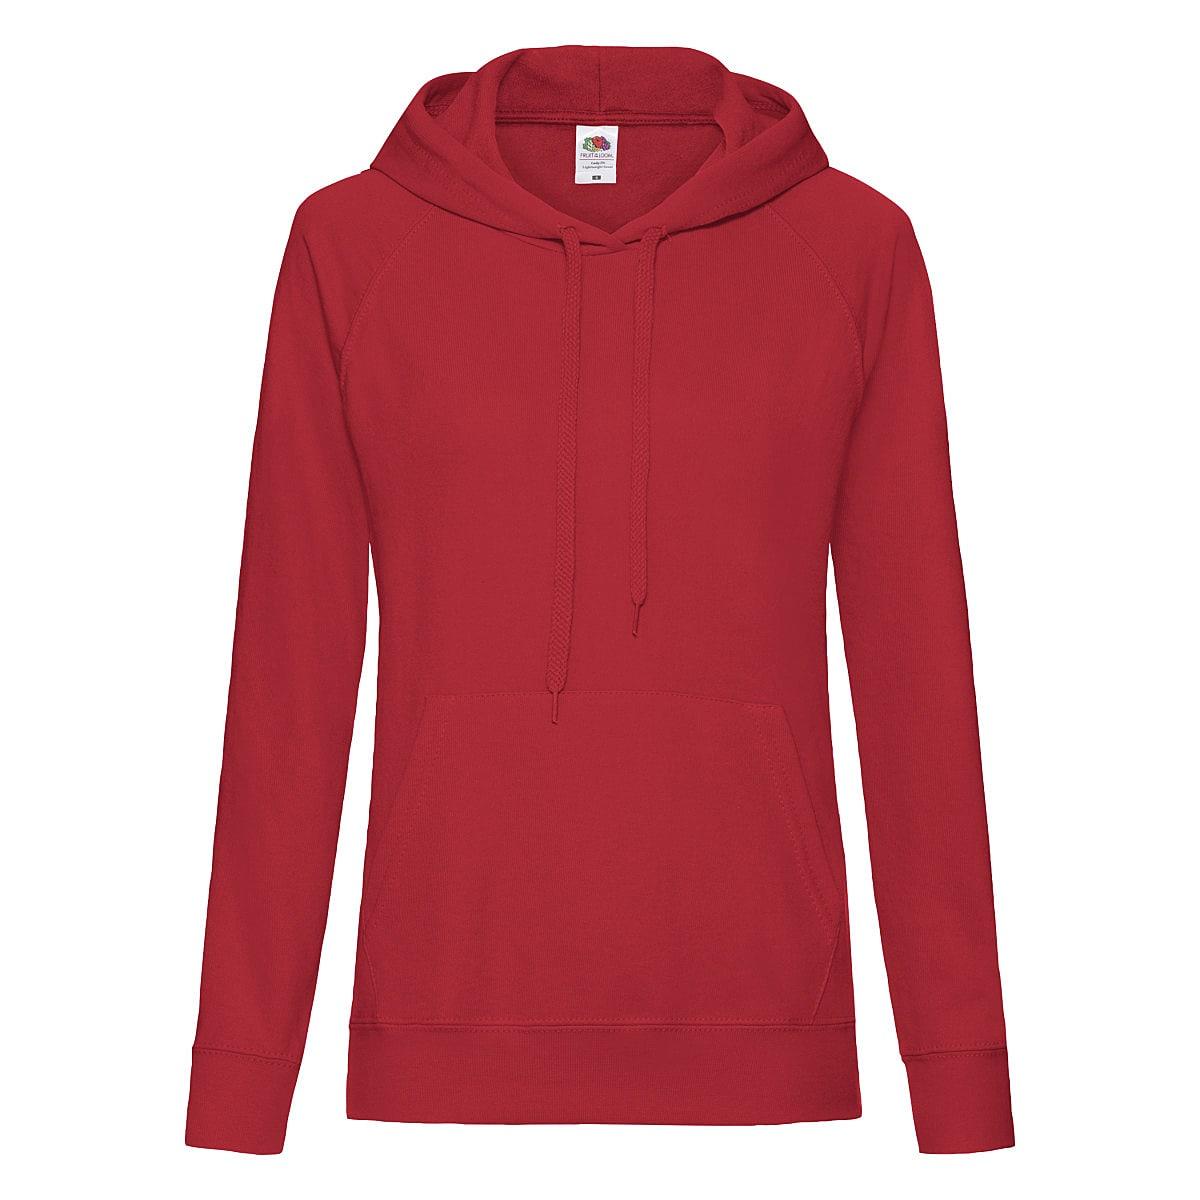 Fruit Of The Loom Lady-Fit Lightweight Hoodie in Red (Product Code: 62148)